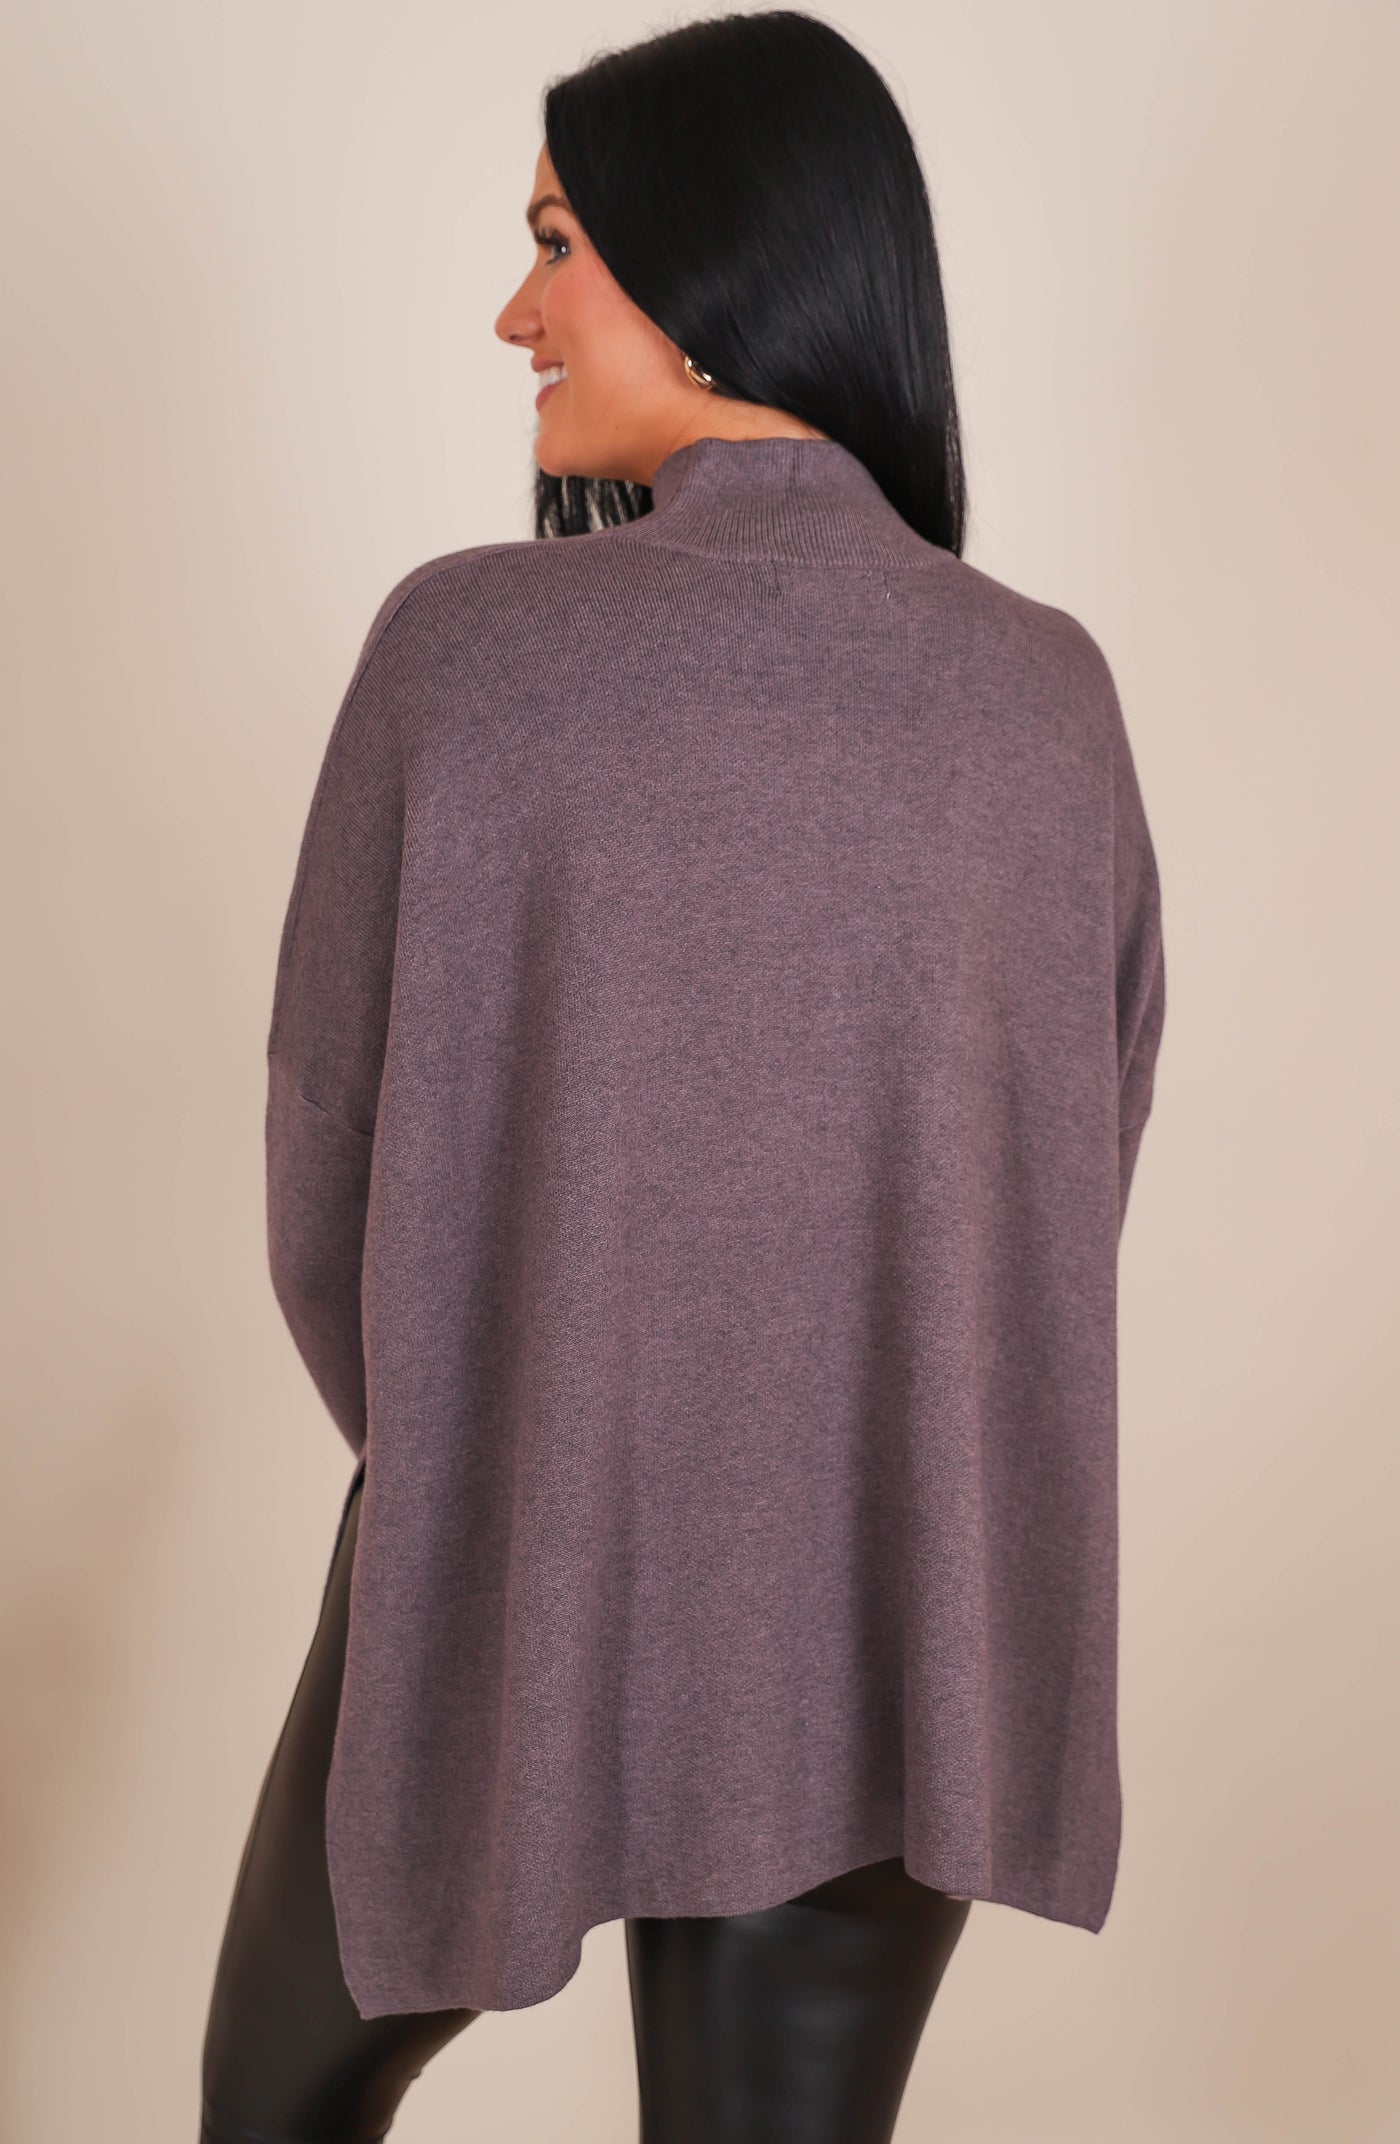 Women's Buttery Soft Sweater- Women's Oversized Poncho Sweater- Entro Sweaters